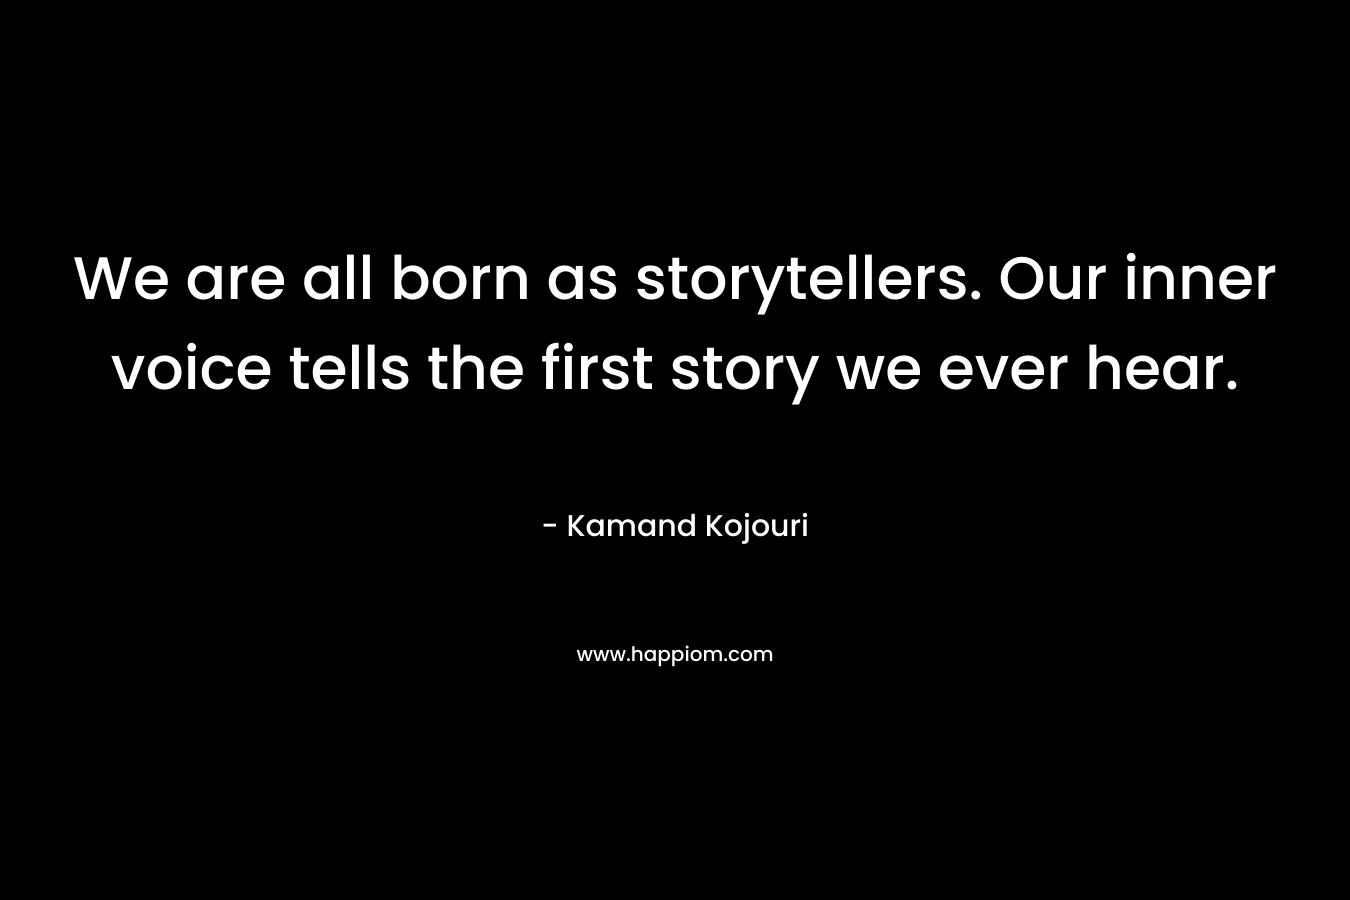 We are all born as storytellers. Our inner voice tells the first story we ever hear. – Kamand Kojouri